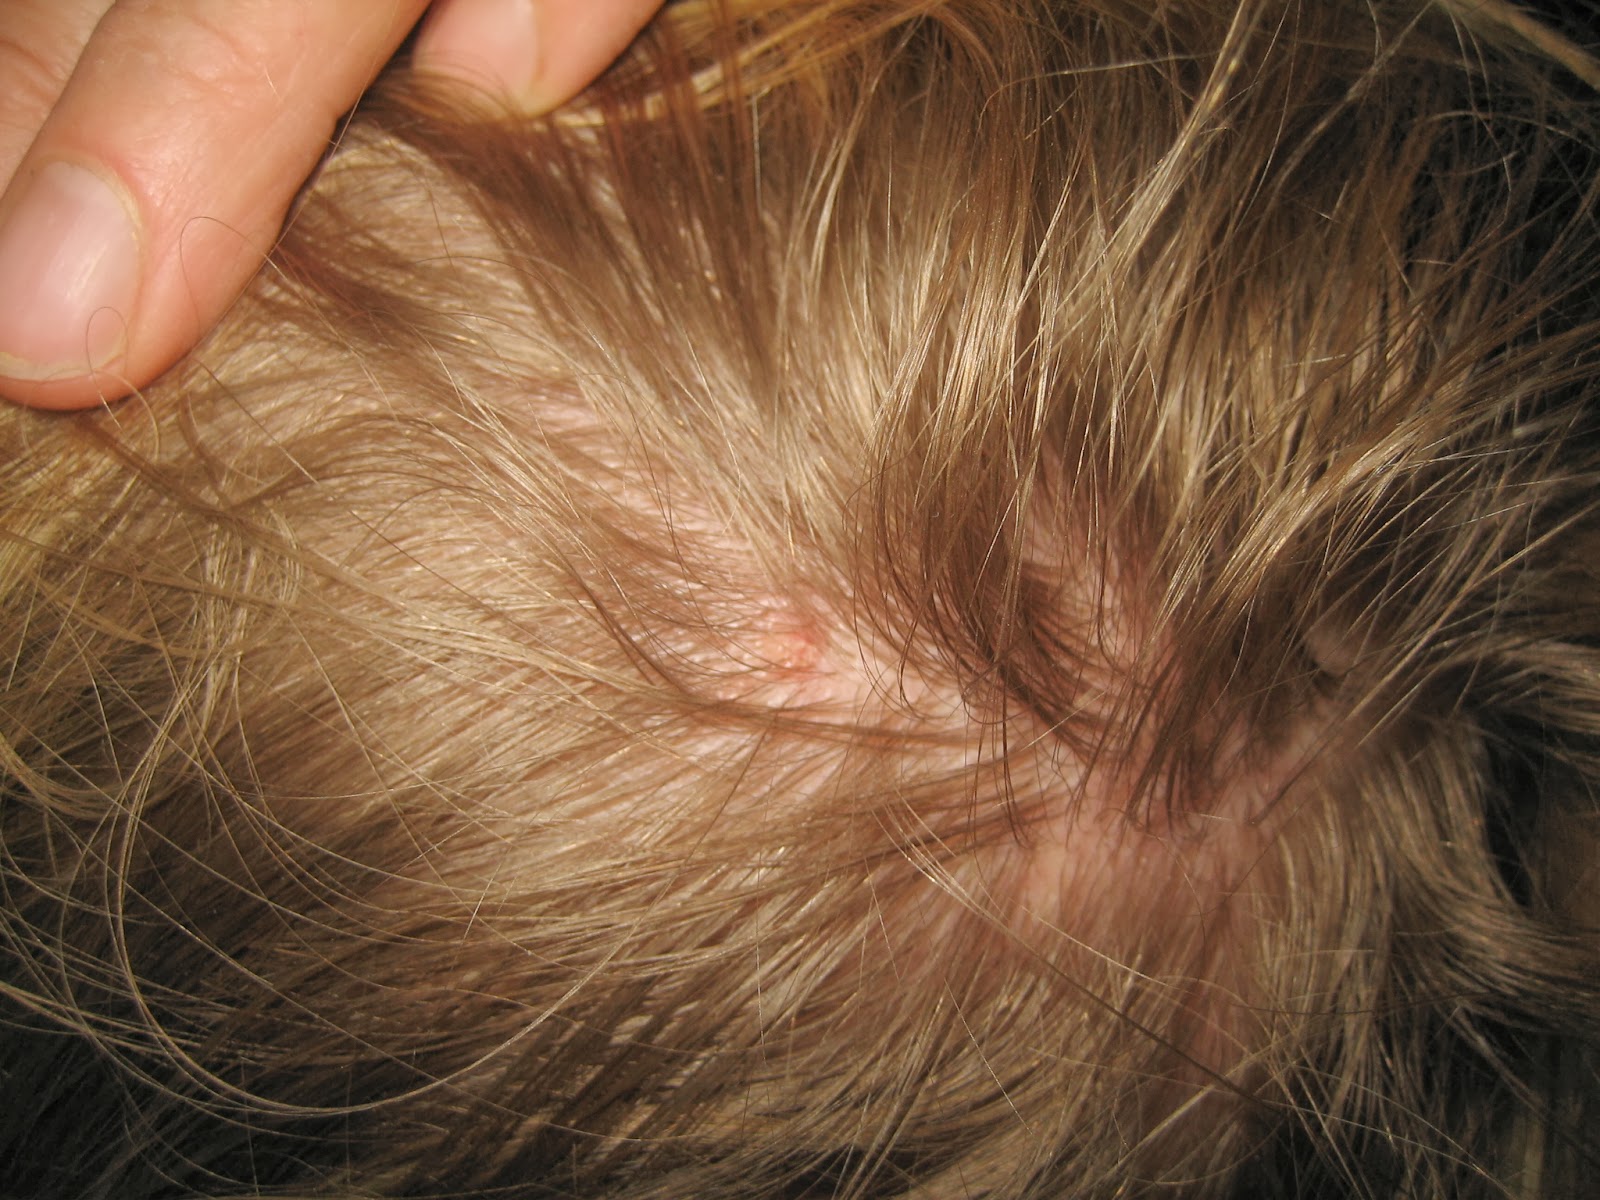 Pictures: How Do You Treat and Prevent Head Lice? - WebMD